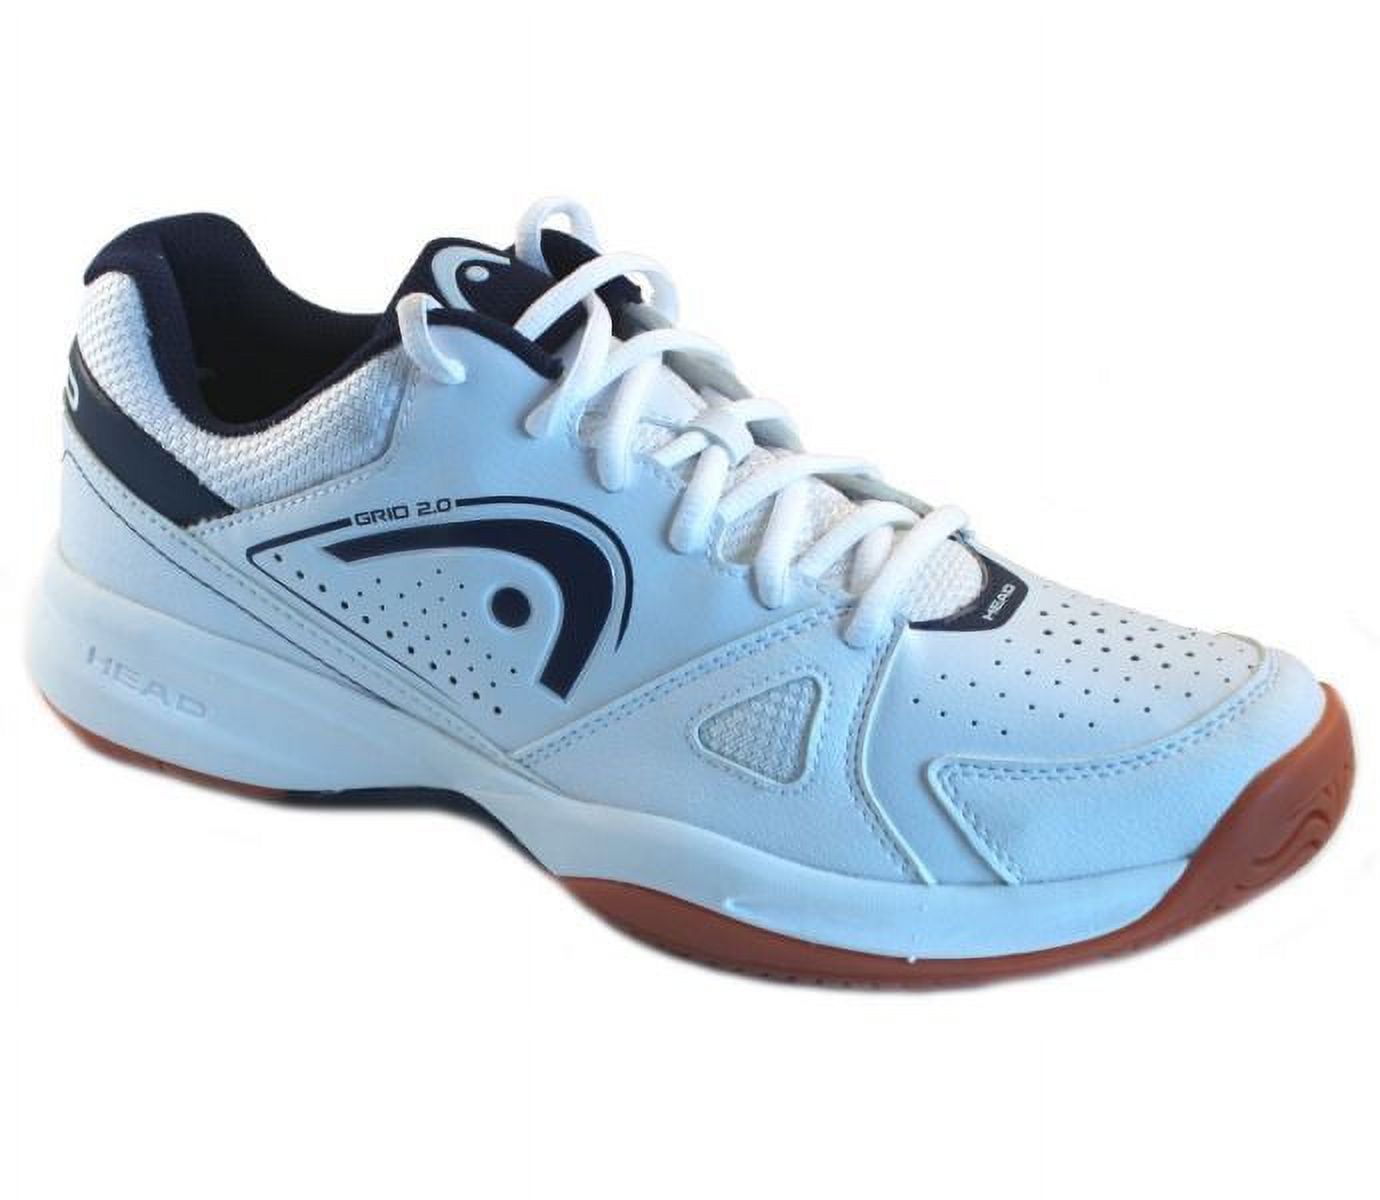 HEAD Men's Grid 2.0 Low Racquetball/Squash Indoor Court Shoes (Non-Marking) (White/Navy) 12.0 (D) US - image 1 of 7